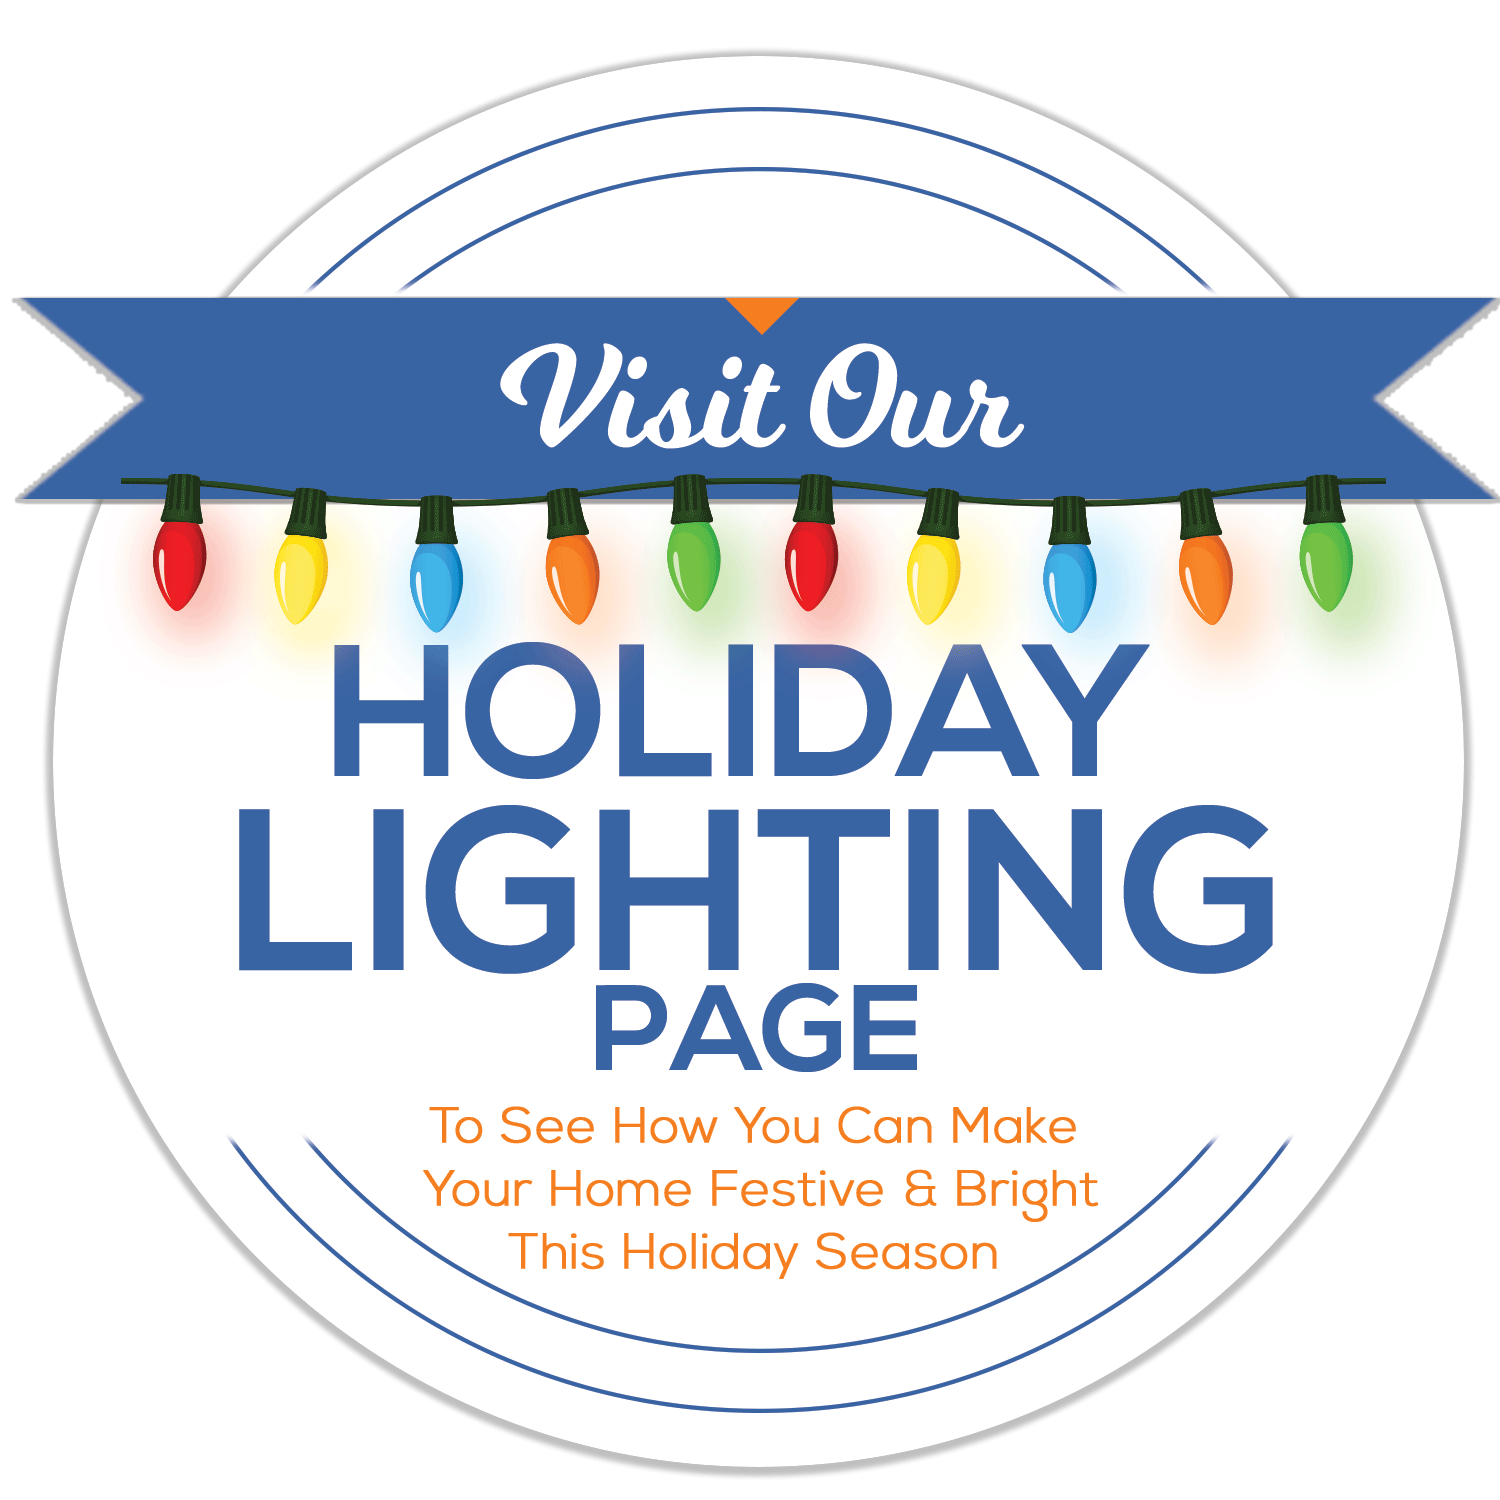 Visit our holiday lighting page to learn how to make your home festive for the holiday season